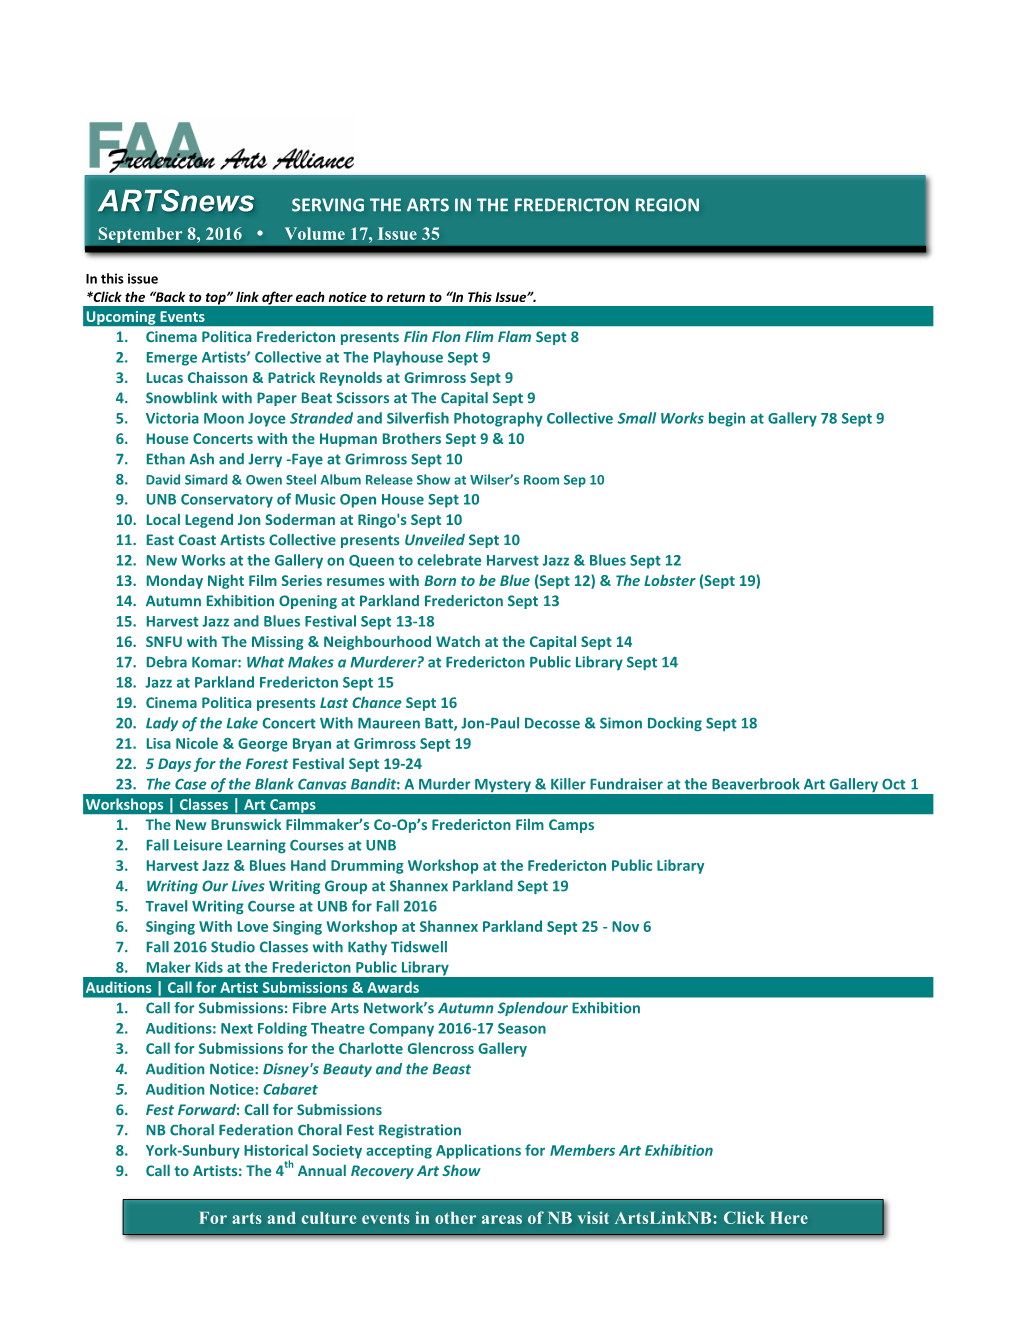 Artsnews SERVING the ARTS in the FREDERICTON REGION September 8, 2016 Volume 17, Issue 35